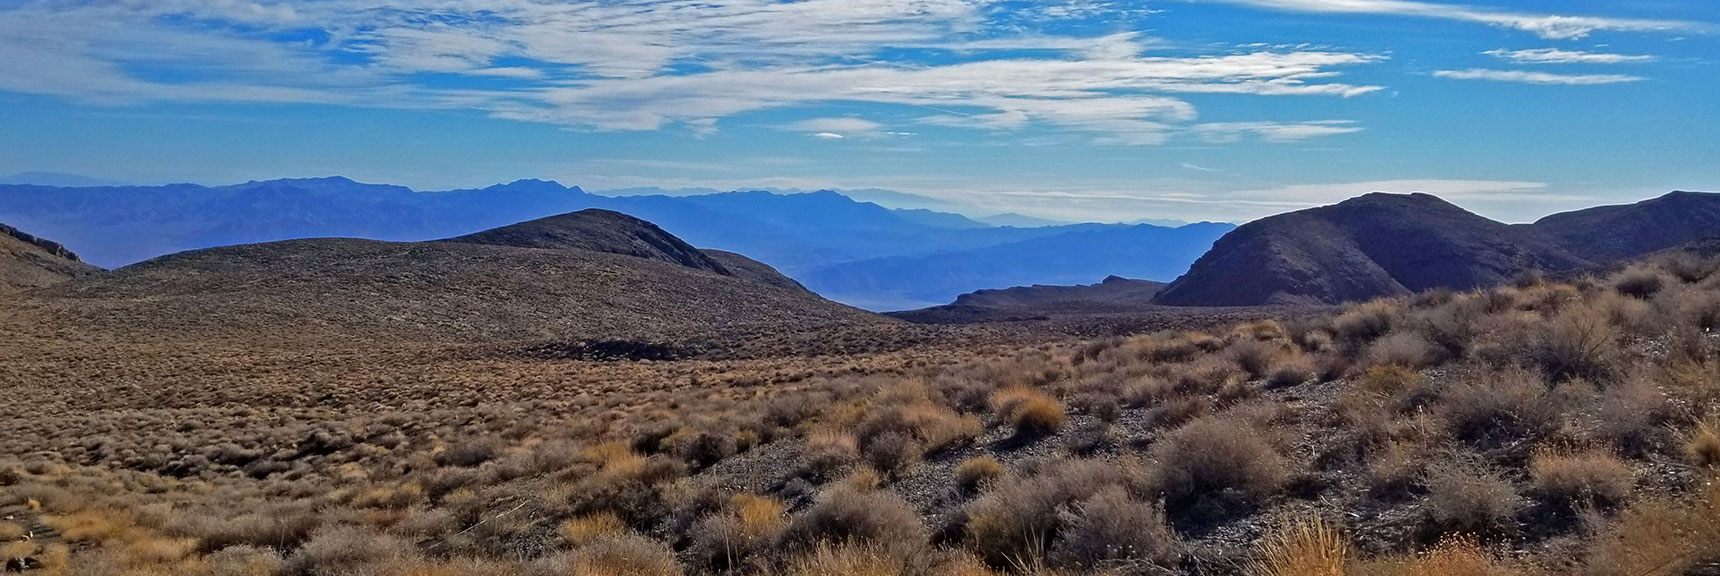 View South Down Death Valley, Mt. Charleston Wilderness Faint in Distance | Skidoo Stamp Mill, Panamint Mountains, Death Valley National Park, CA